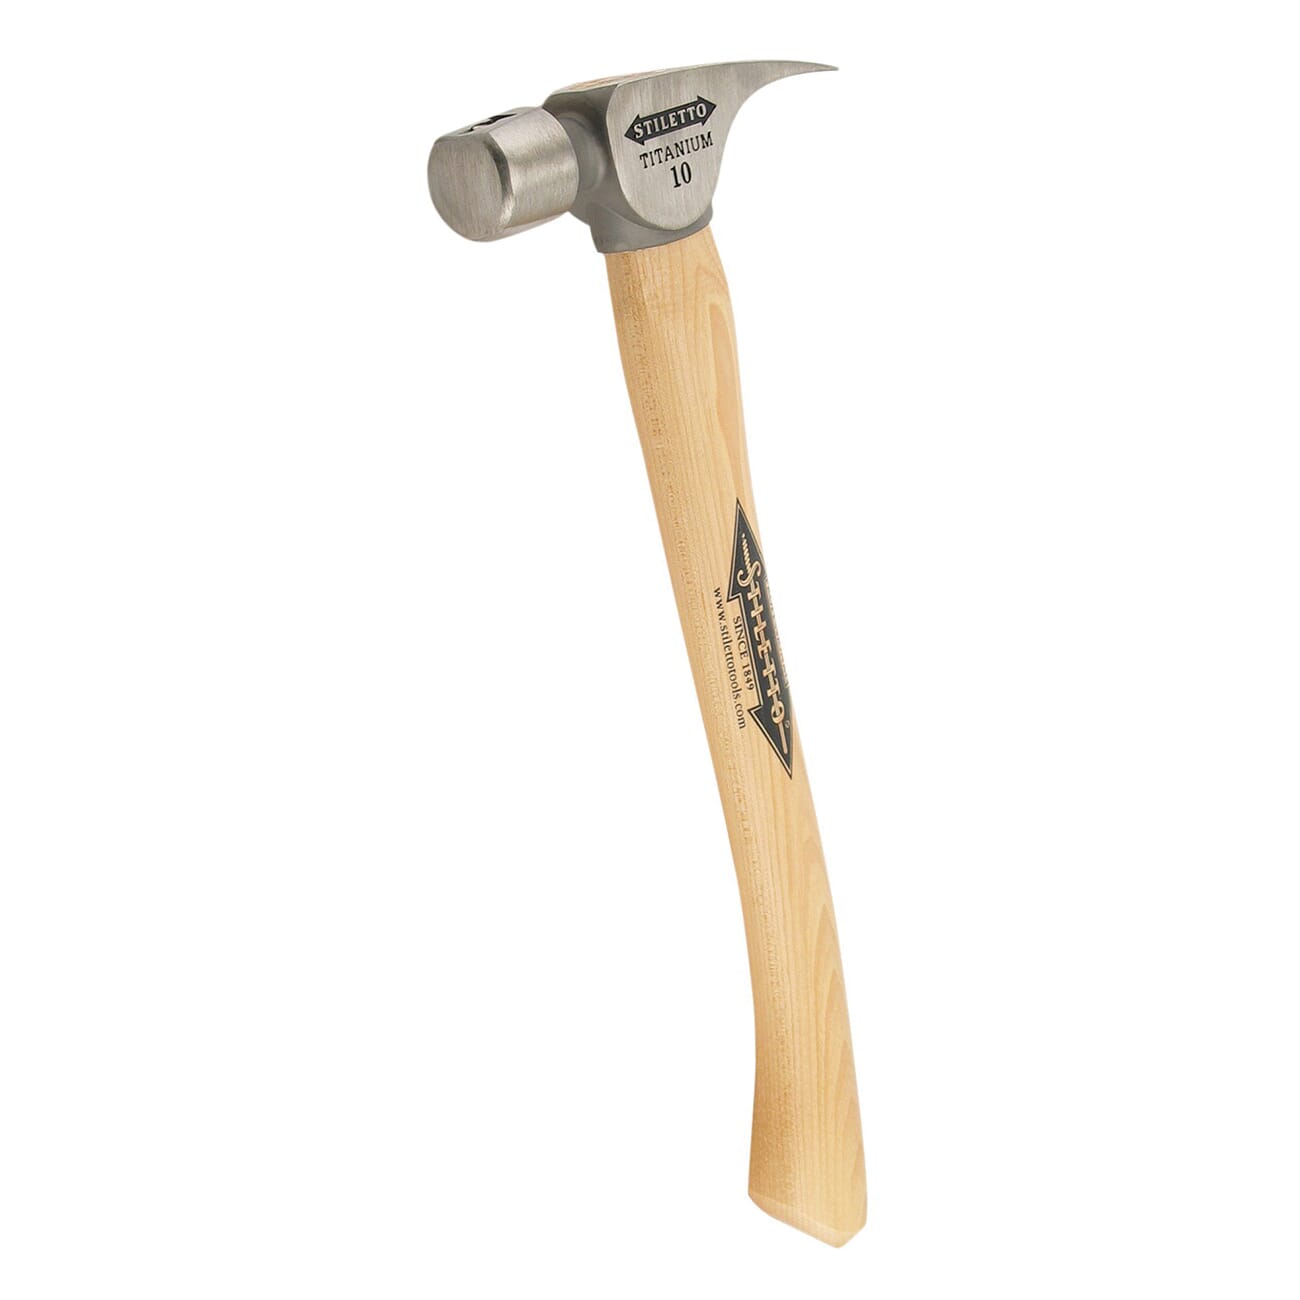 Stiletto® FH10C Heavy Duty Finishing Hammer, 14-1/2 in OAL, Smooth Face Surface, 10 oz Titanium Head, Straight Claw, Hickory Wood Handle